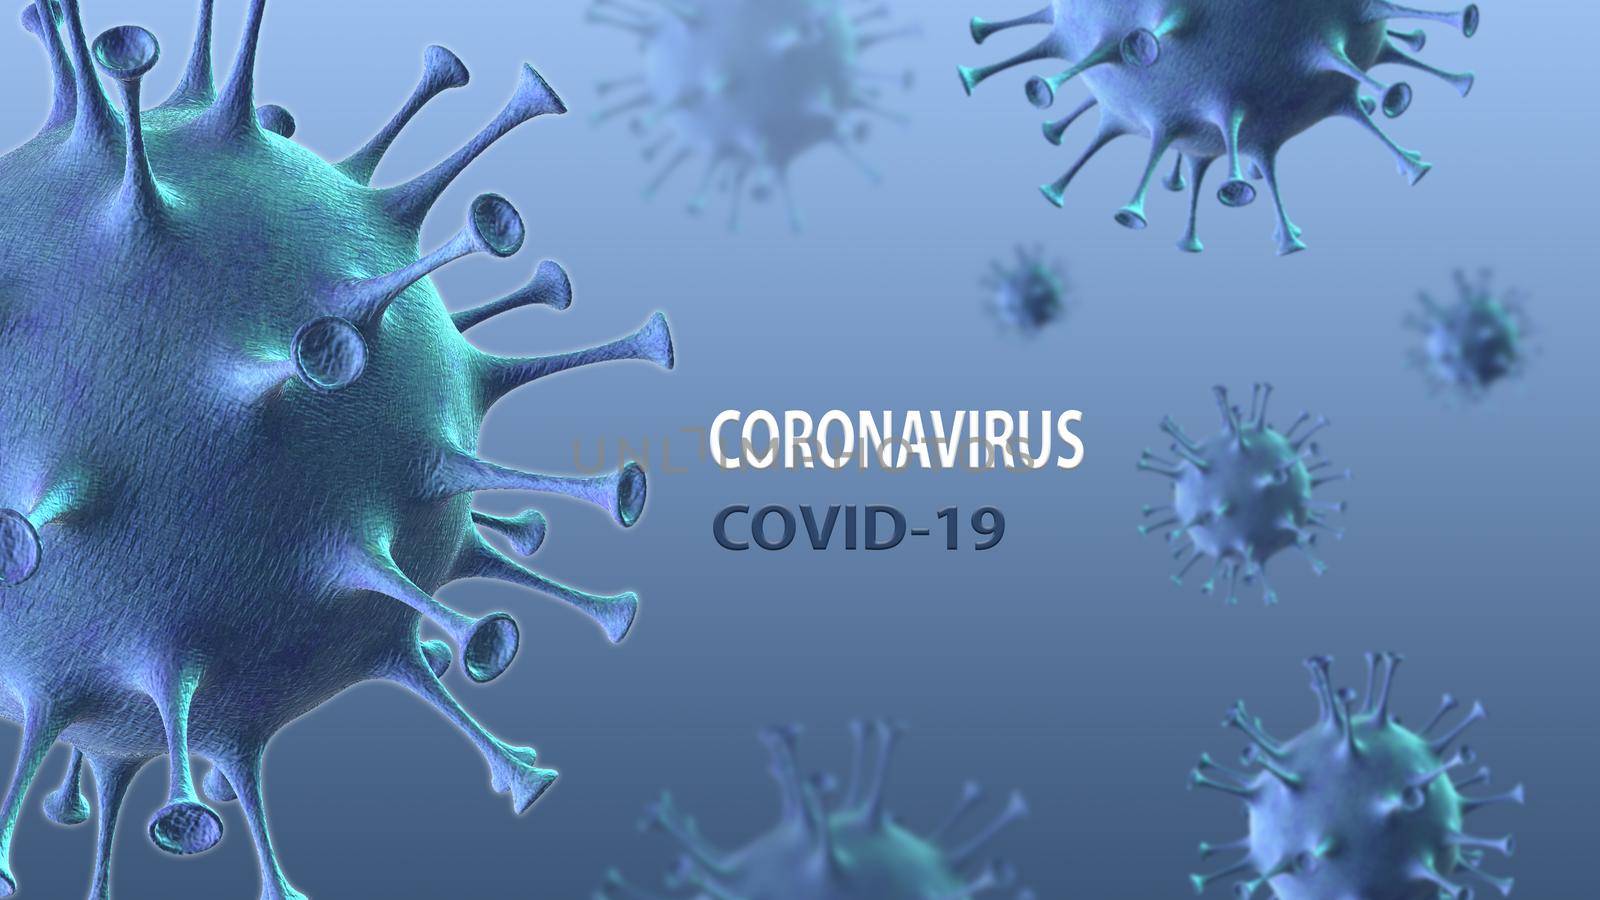 Coronavirus disease COVID-19 medical web banner with SARS-CoV-2 virus molecule and text on a background. World pandemic 2020. Horizontal 3D illustration.